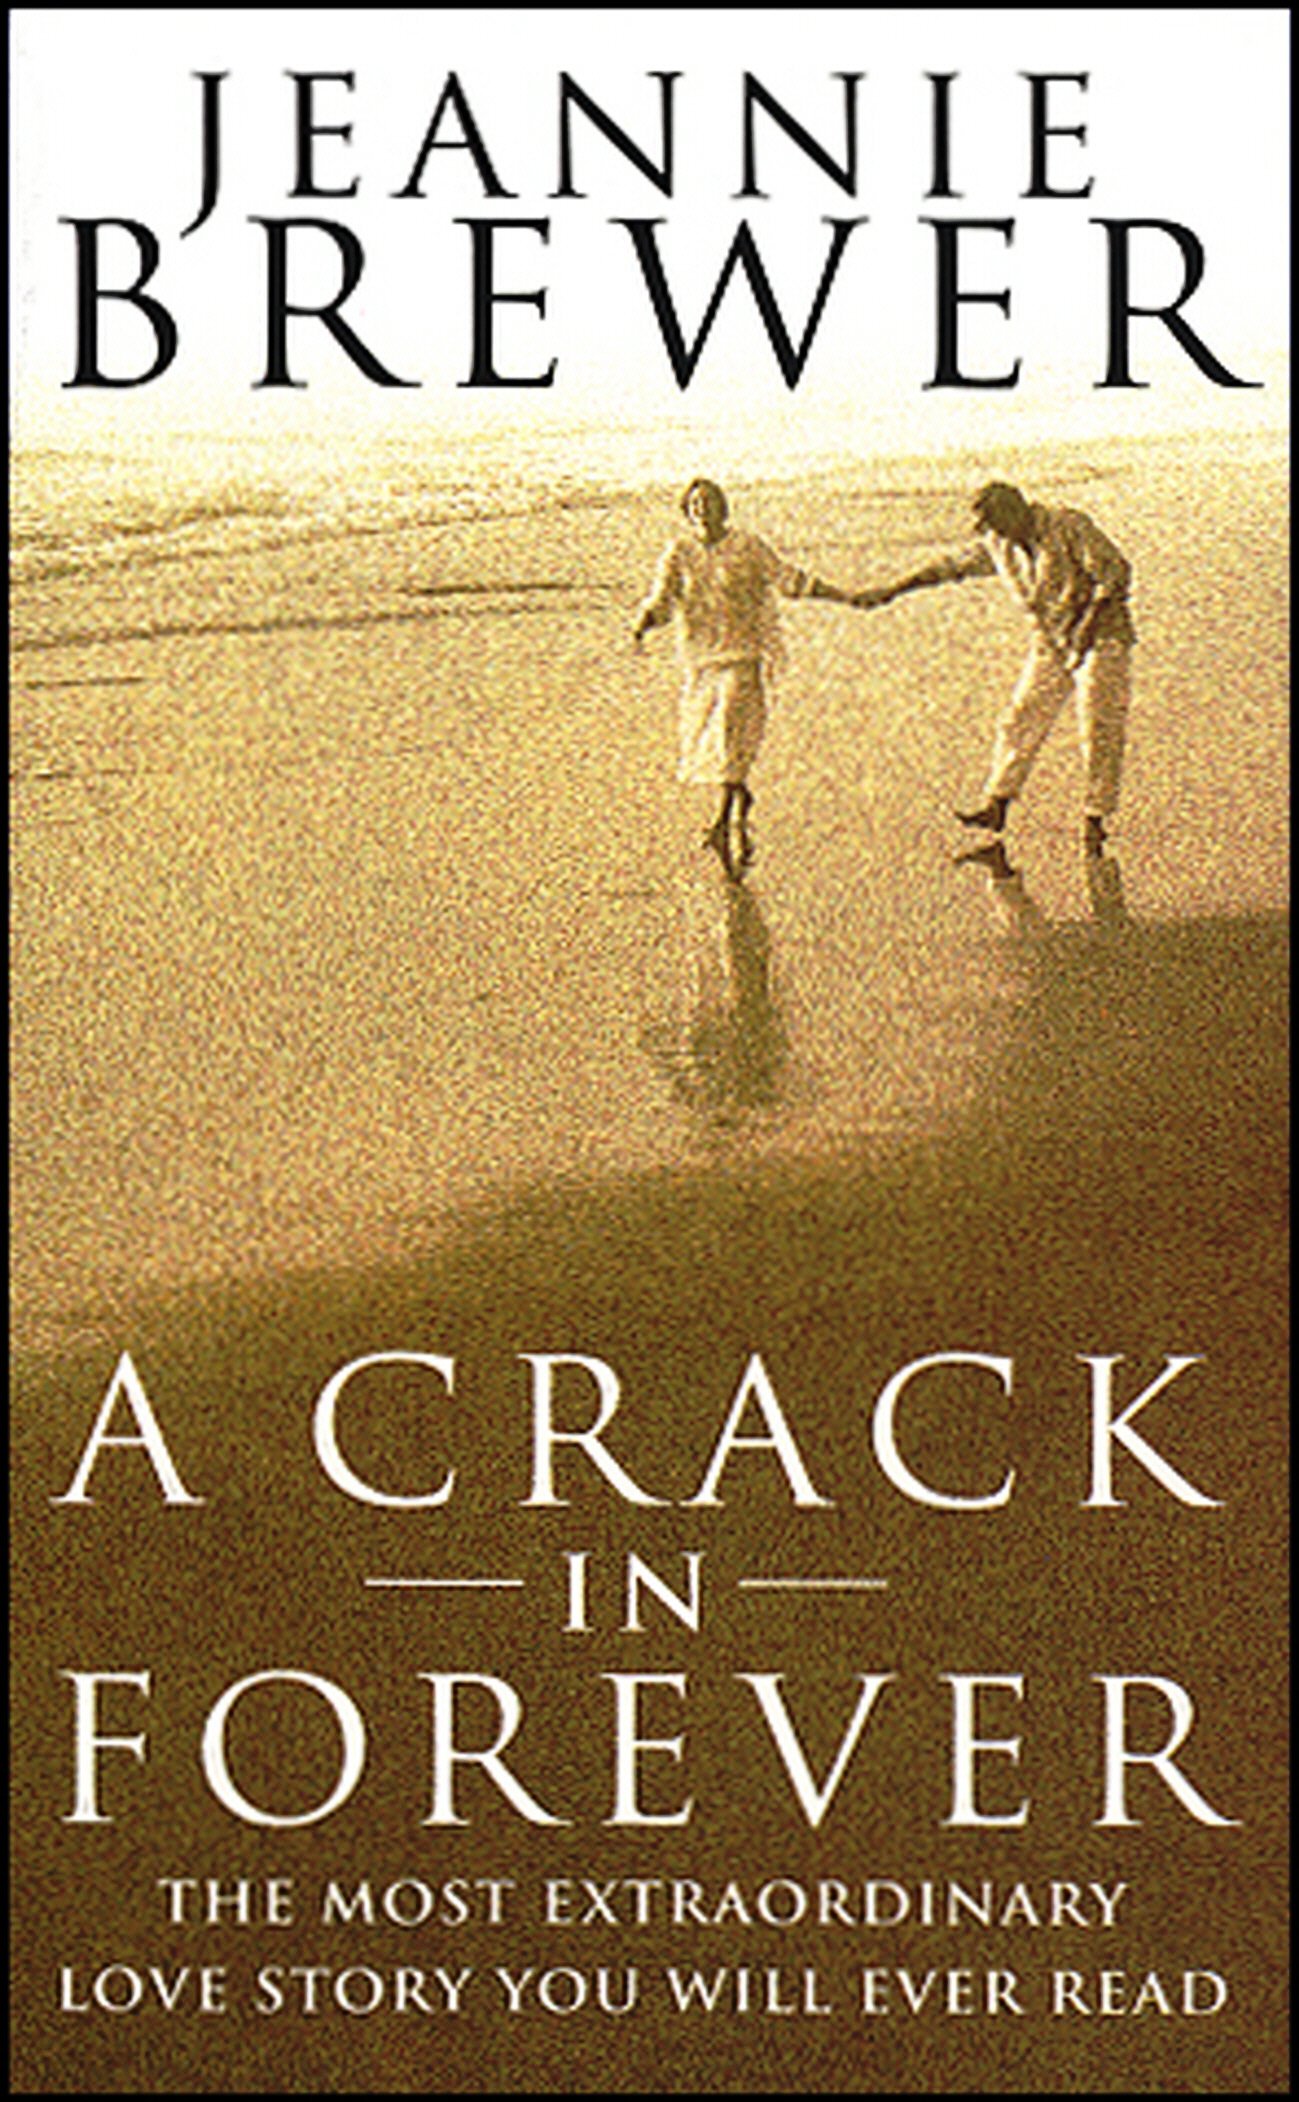 A Crack in Forever